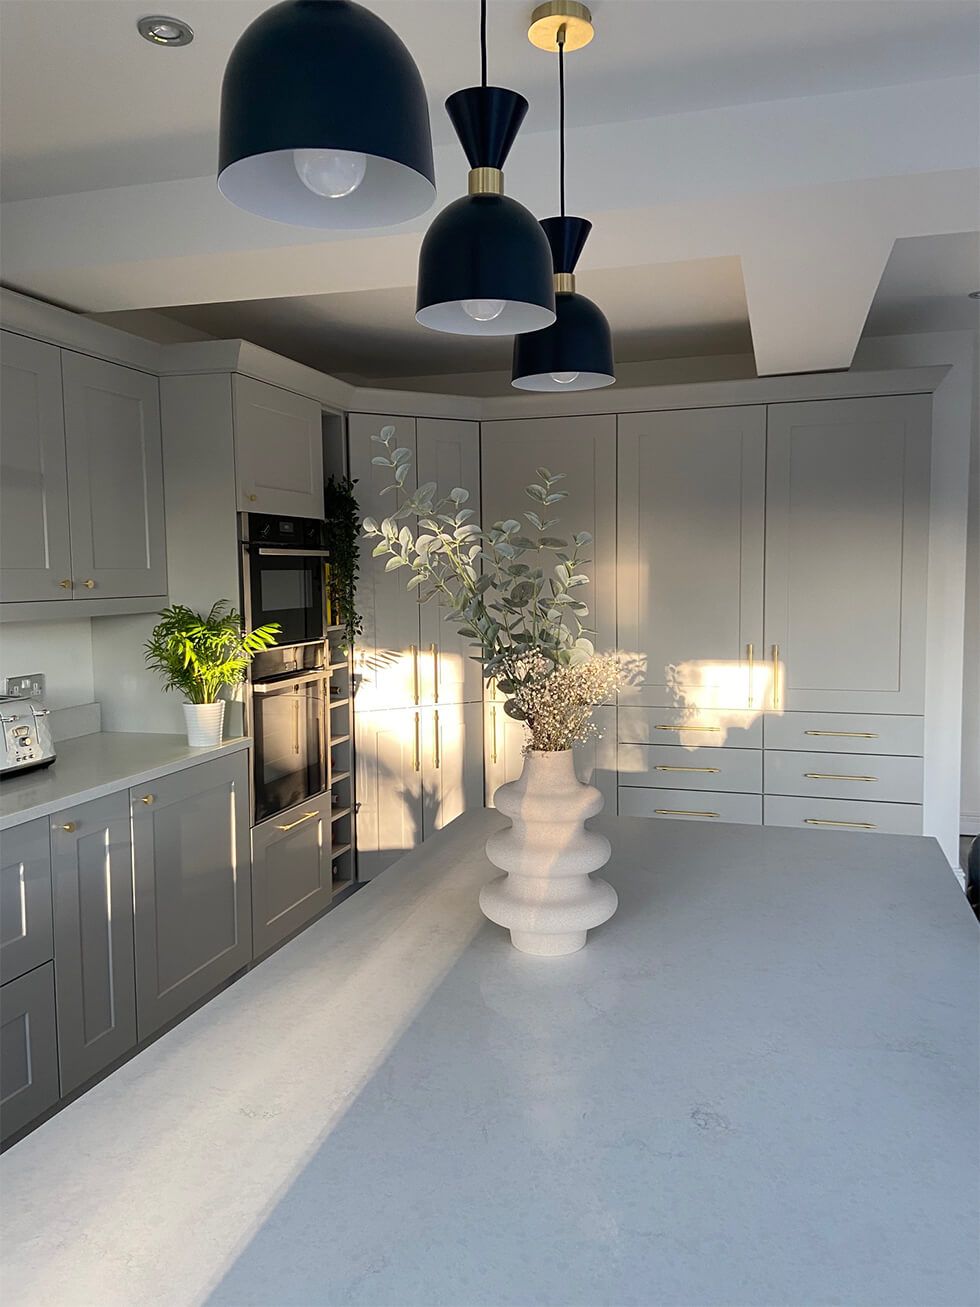 A light grey kitchen with a big centre island and chic pendant lamps